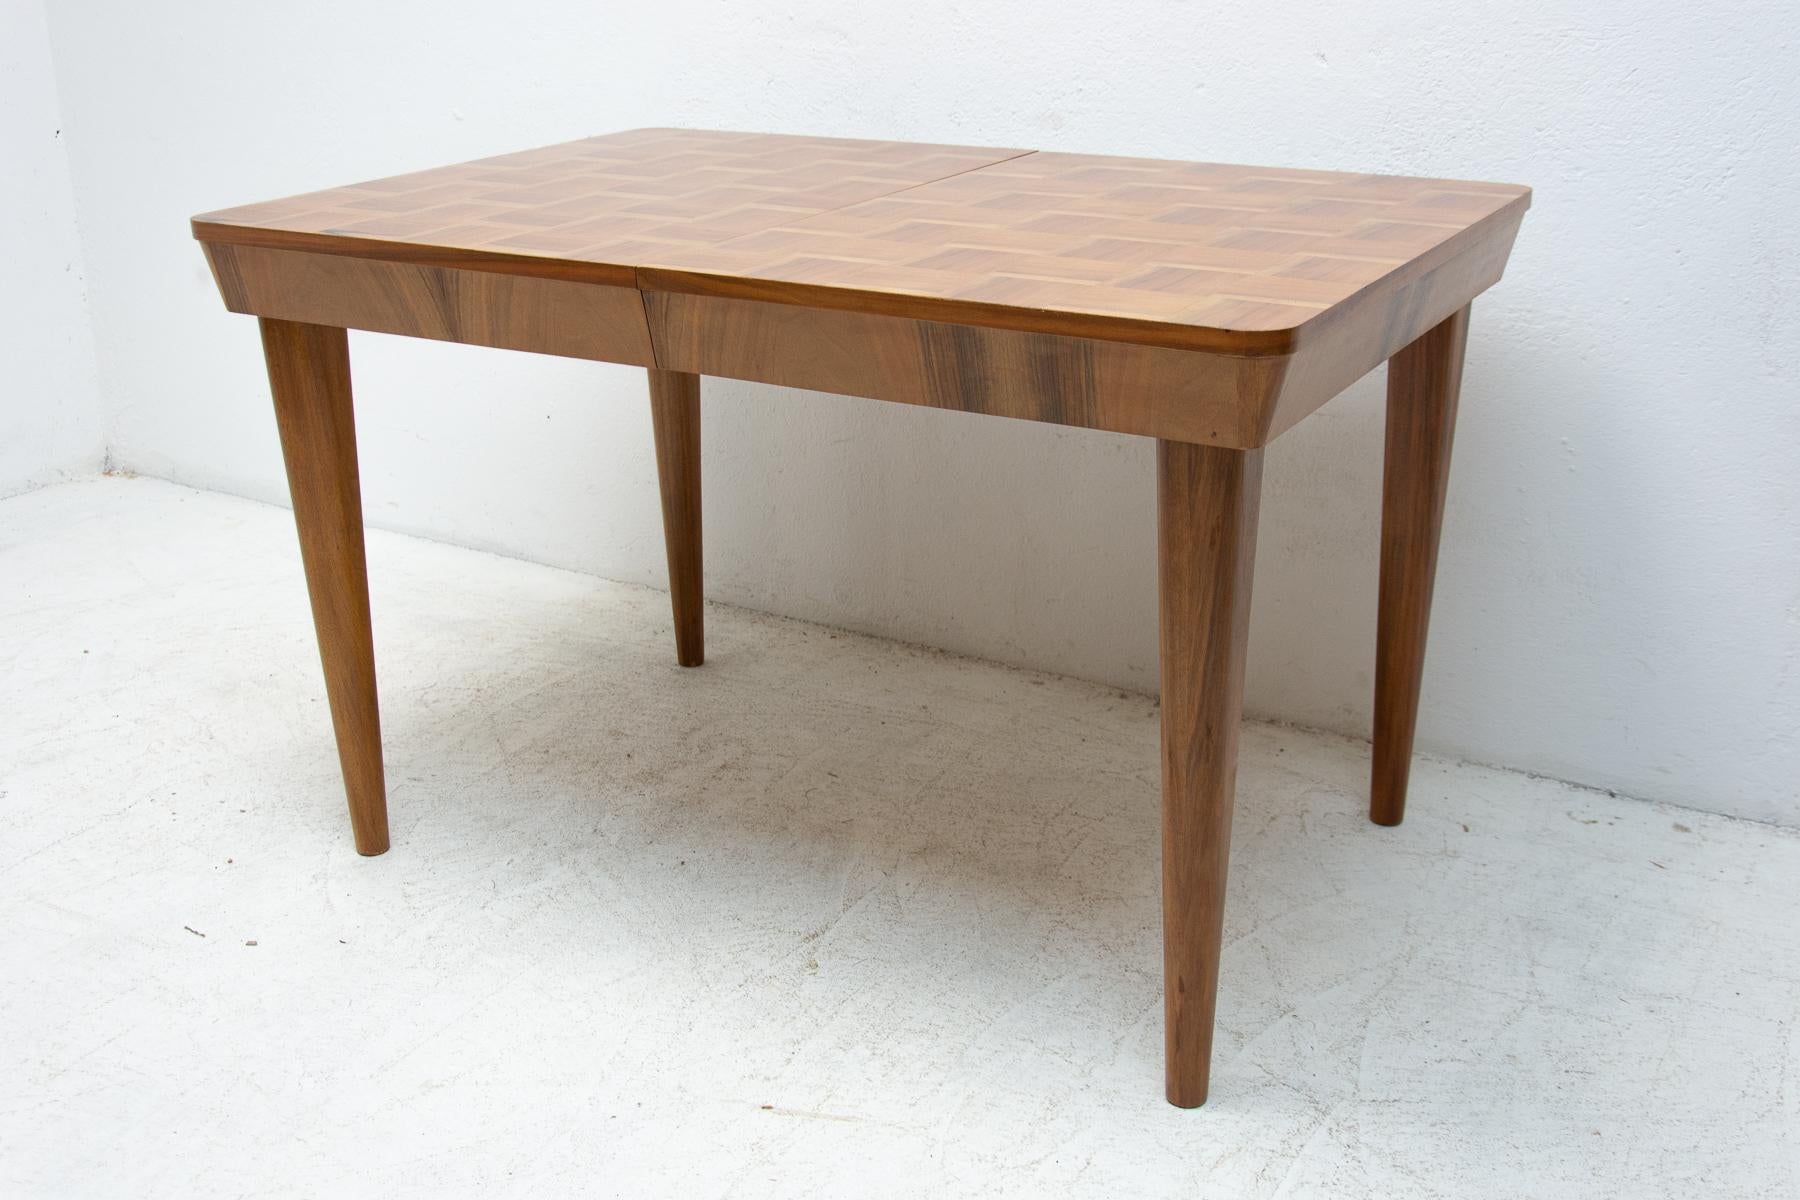 Czech Fully Restored Midcentury Adjustable Dining Table with a Chess Pattern by Jindř